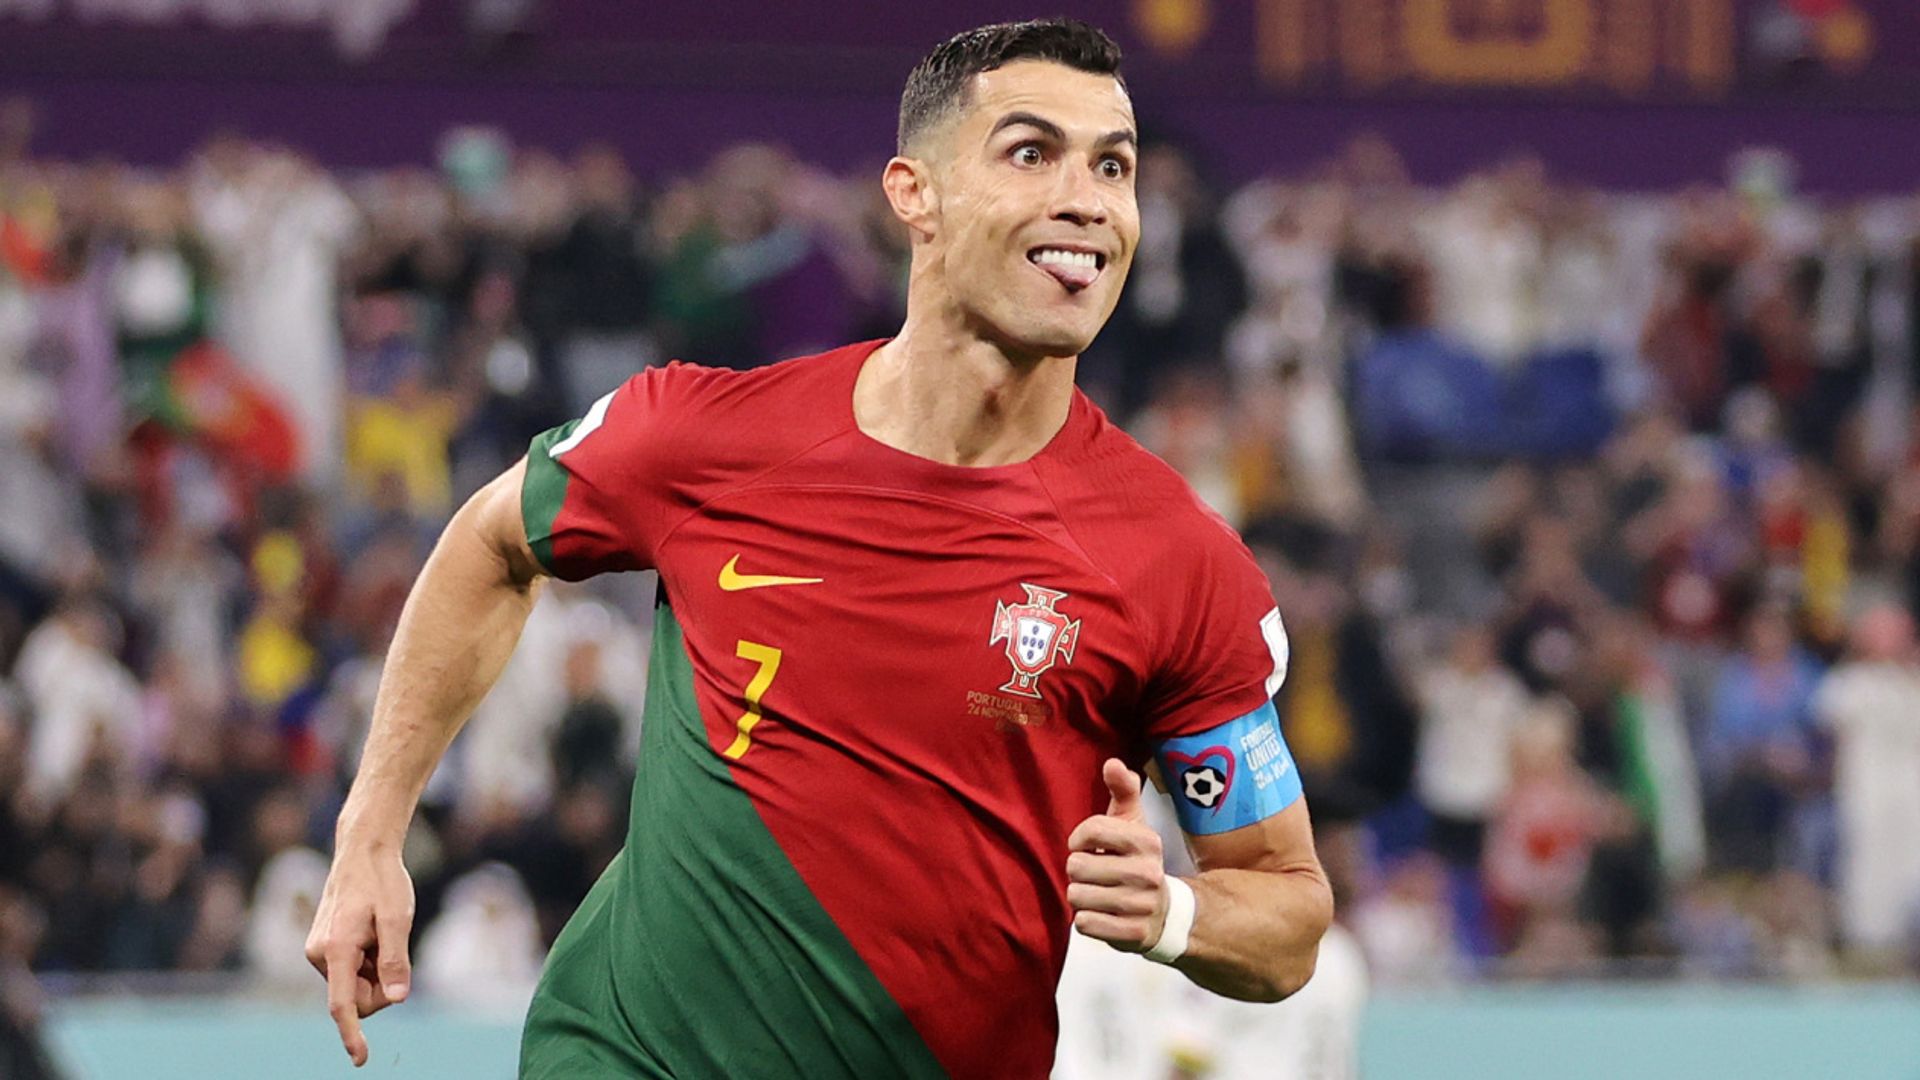 Ronaldo makes history as Portugal win opener | Ghana coach: The ref cost us